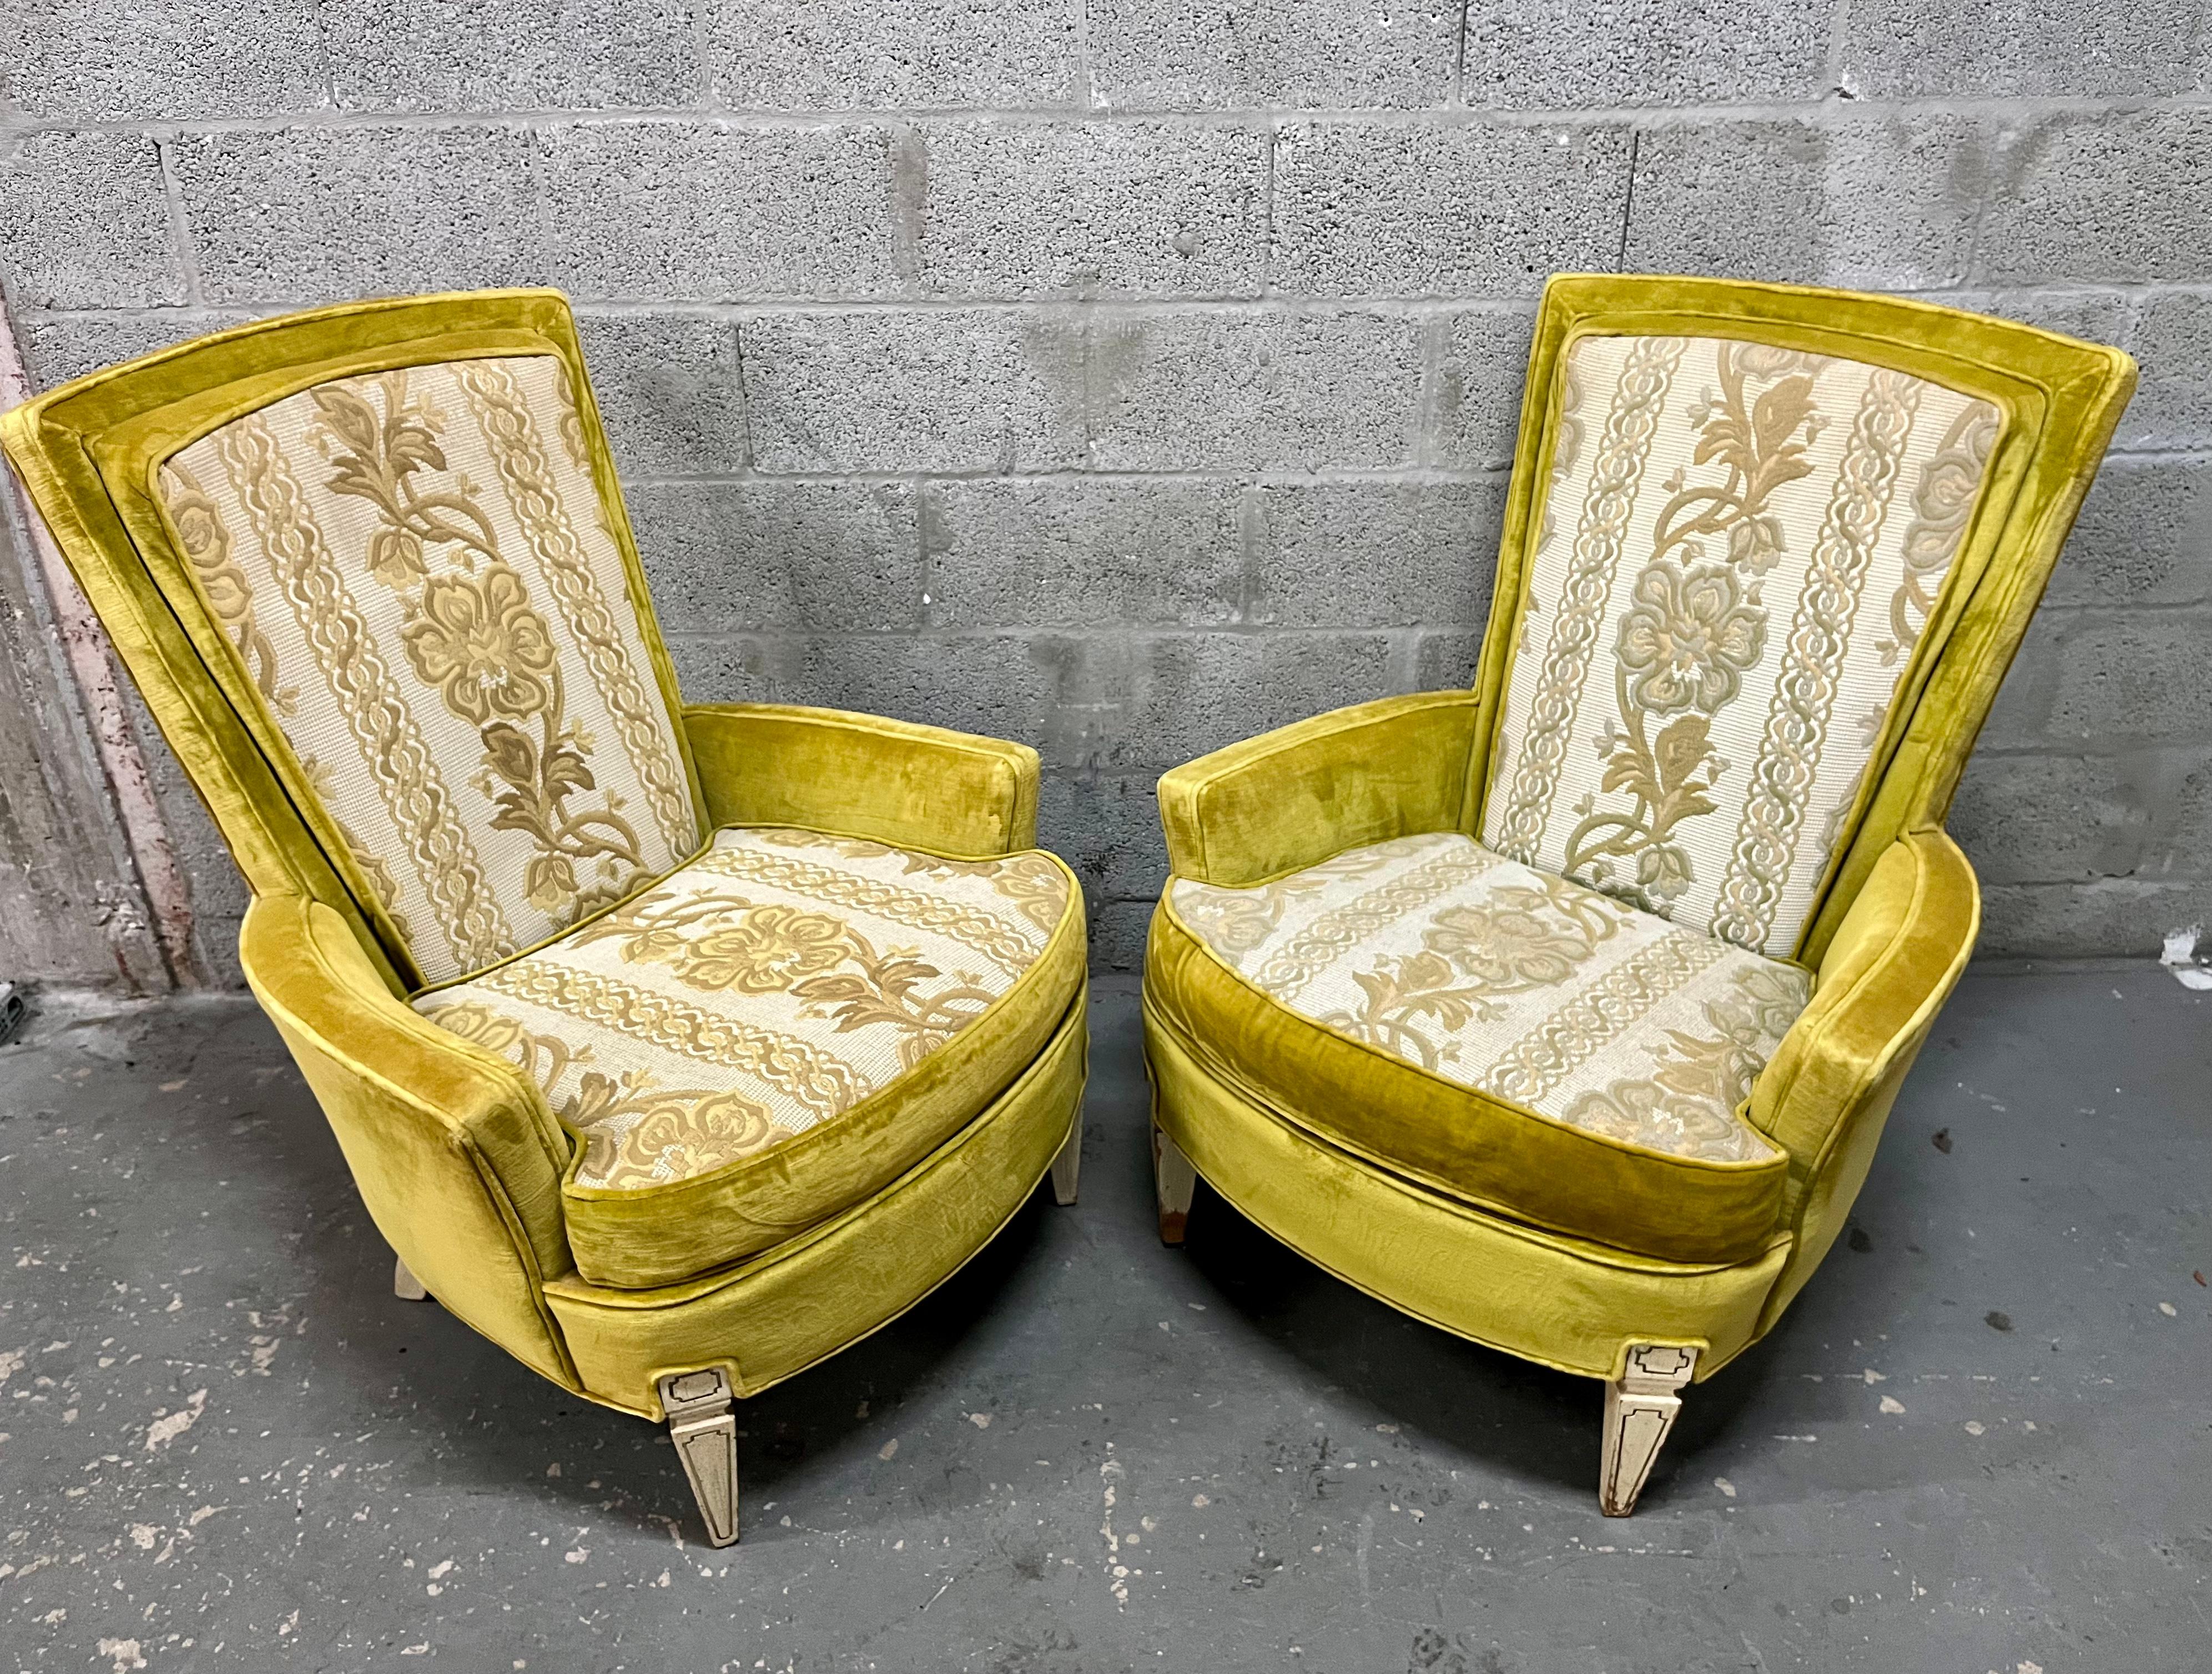 American A Pair of Hollywood Regency Upholstered Lounge Chairs by Silver Craft. C. 1960s For Sale